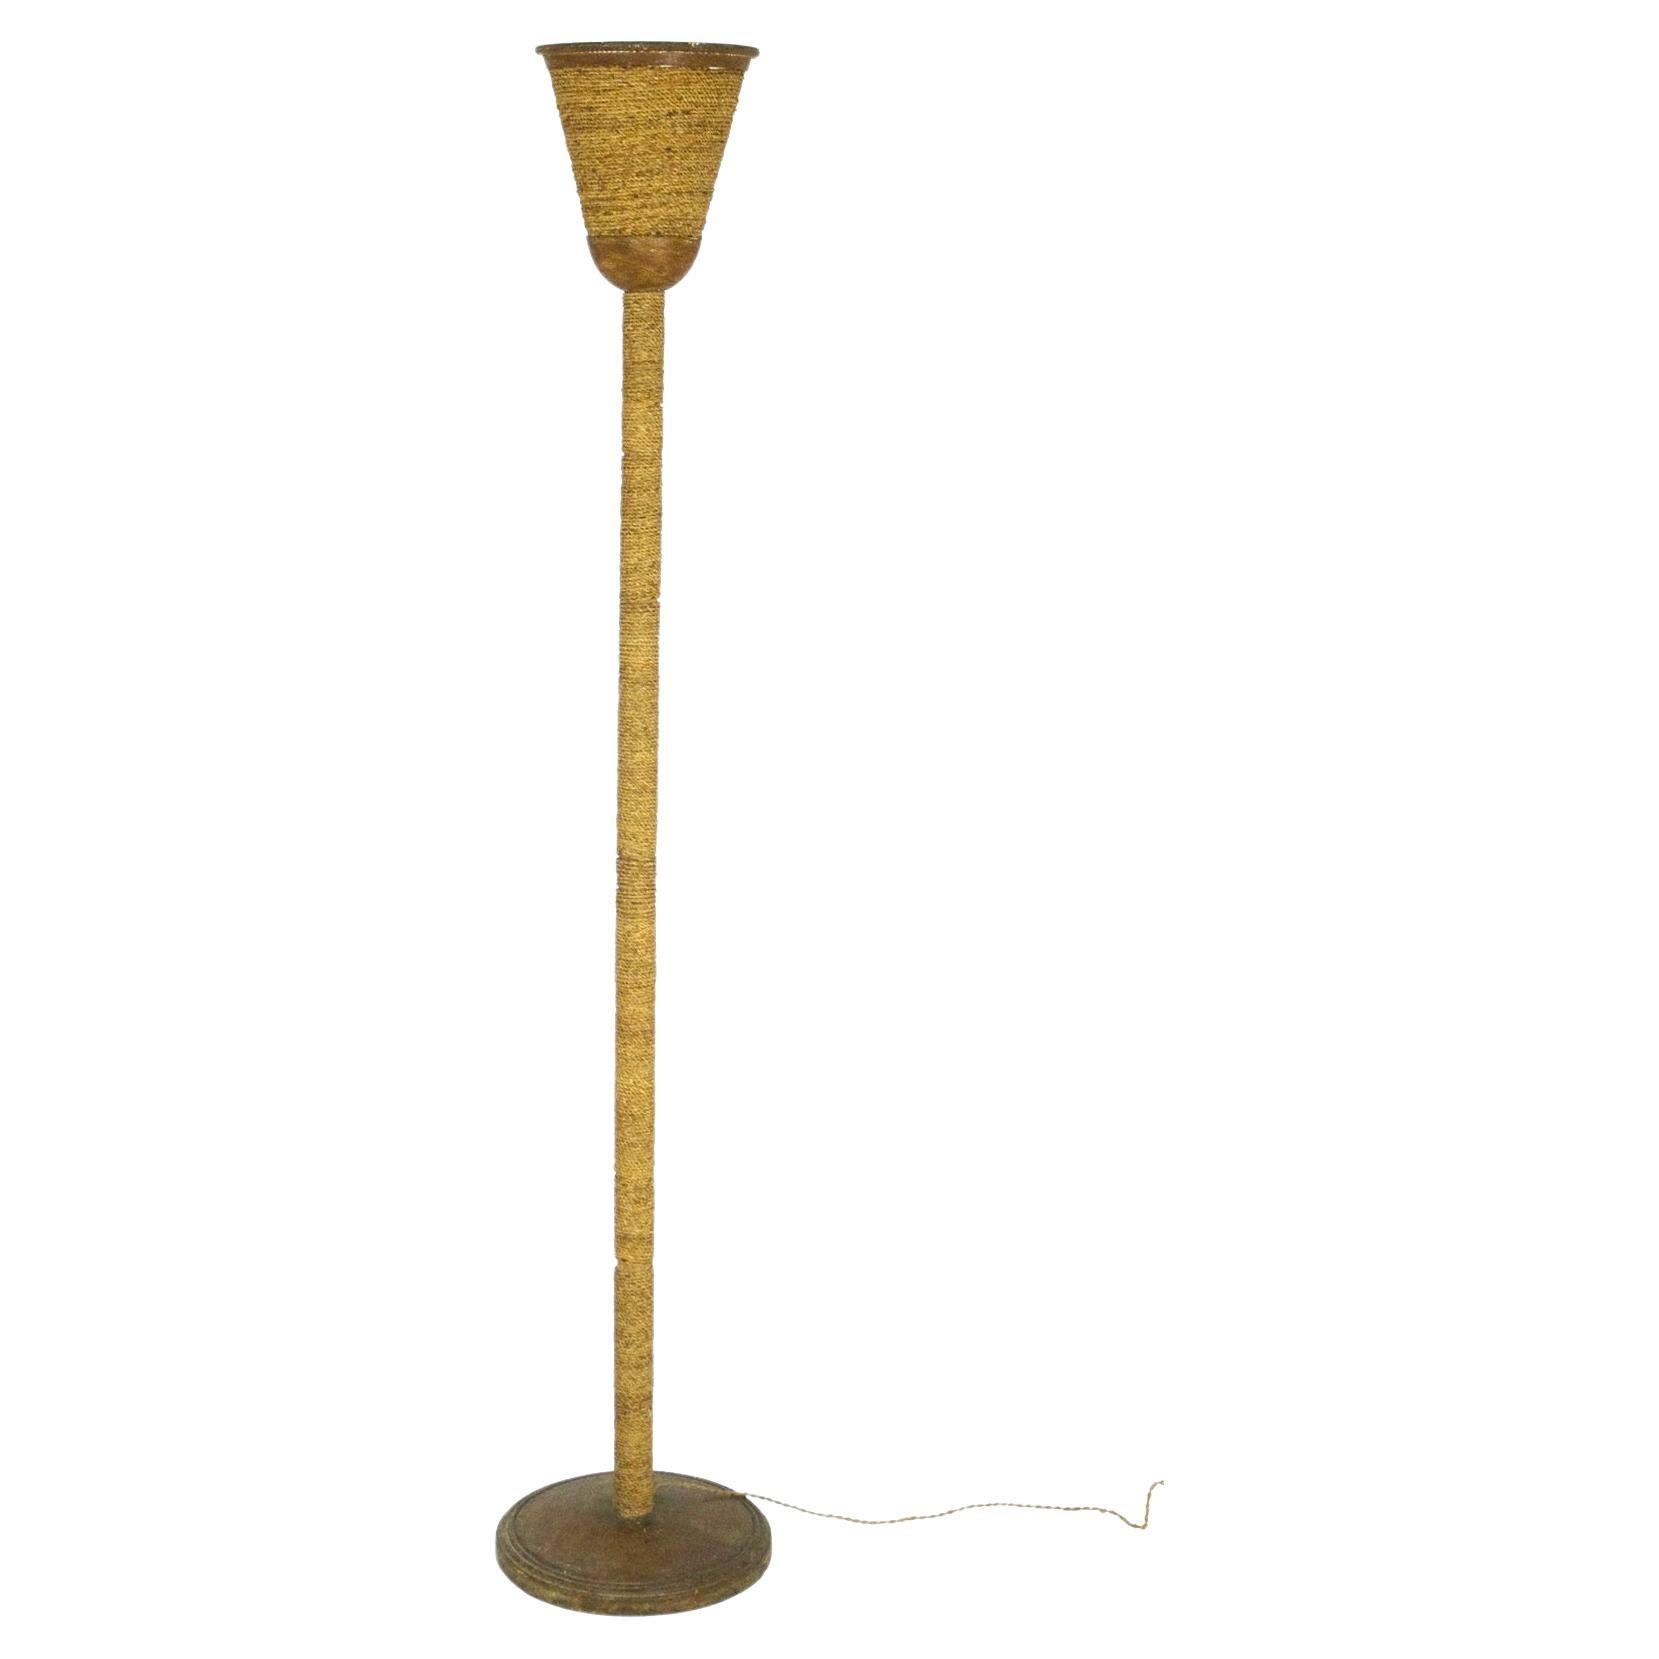 Vintage Italian Wooden and Rope Floor Lamp, 1930s-40s